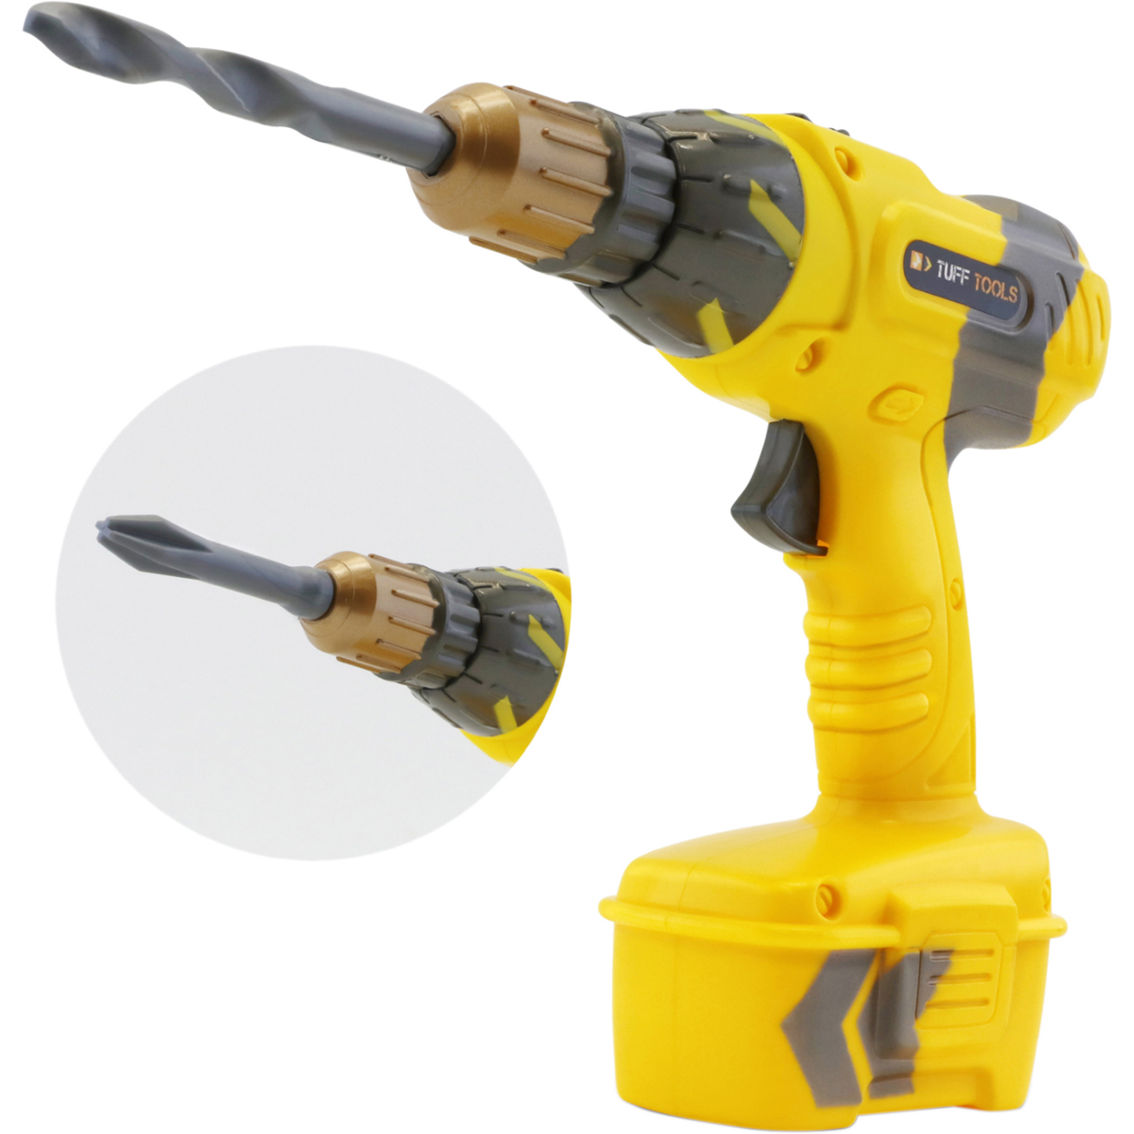 Lanard Tuff Tools Pretend Play Toy Power Drill with Realistic Functions - Image 2 of 2